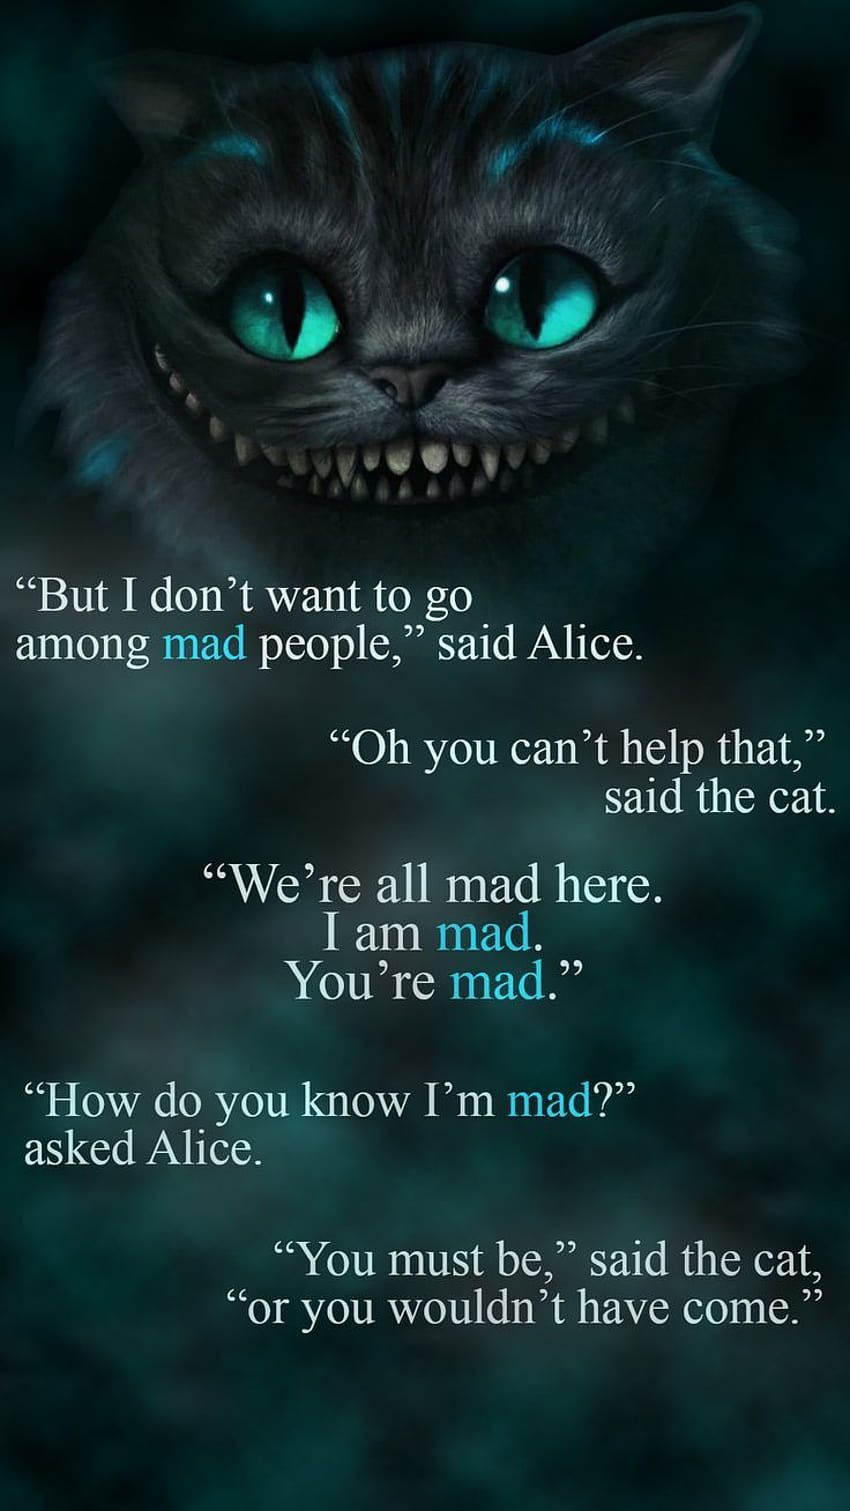 Cheshire Cat Backgrounds posted by Samantha Anderson, were all mad here HD phone wallpaper